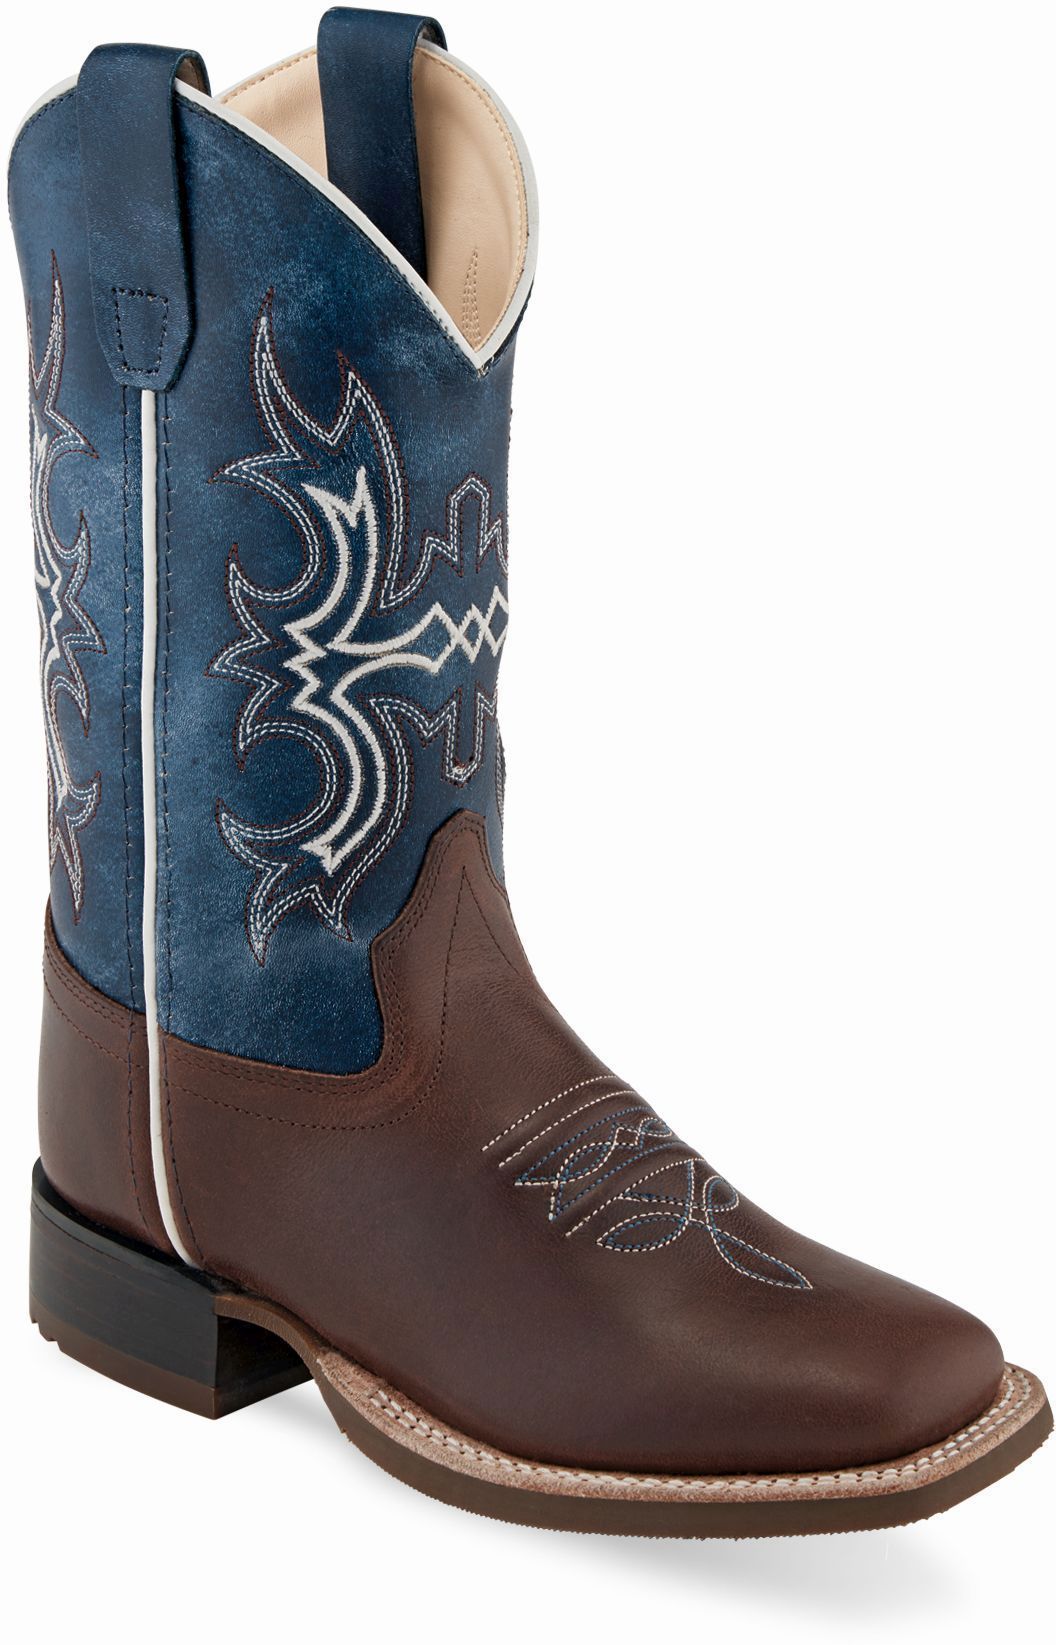 Old West Brown Foot Wipe Out Blue Shaft Youth's Broad Square Toe Boots